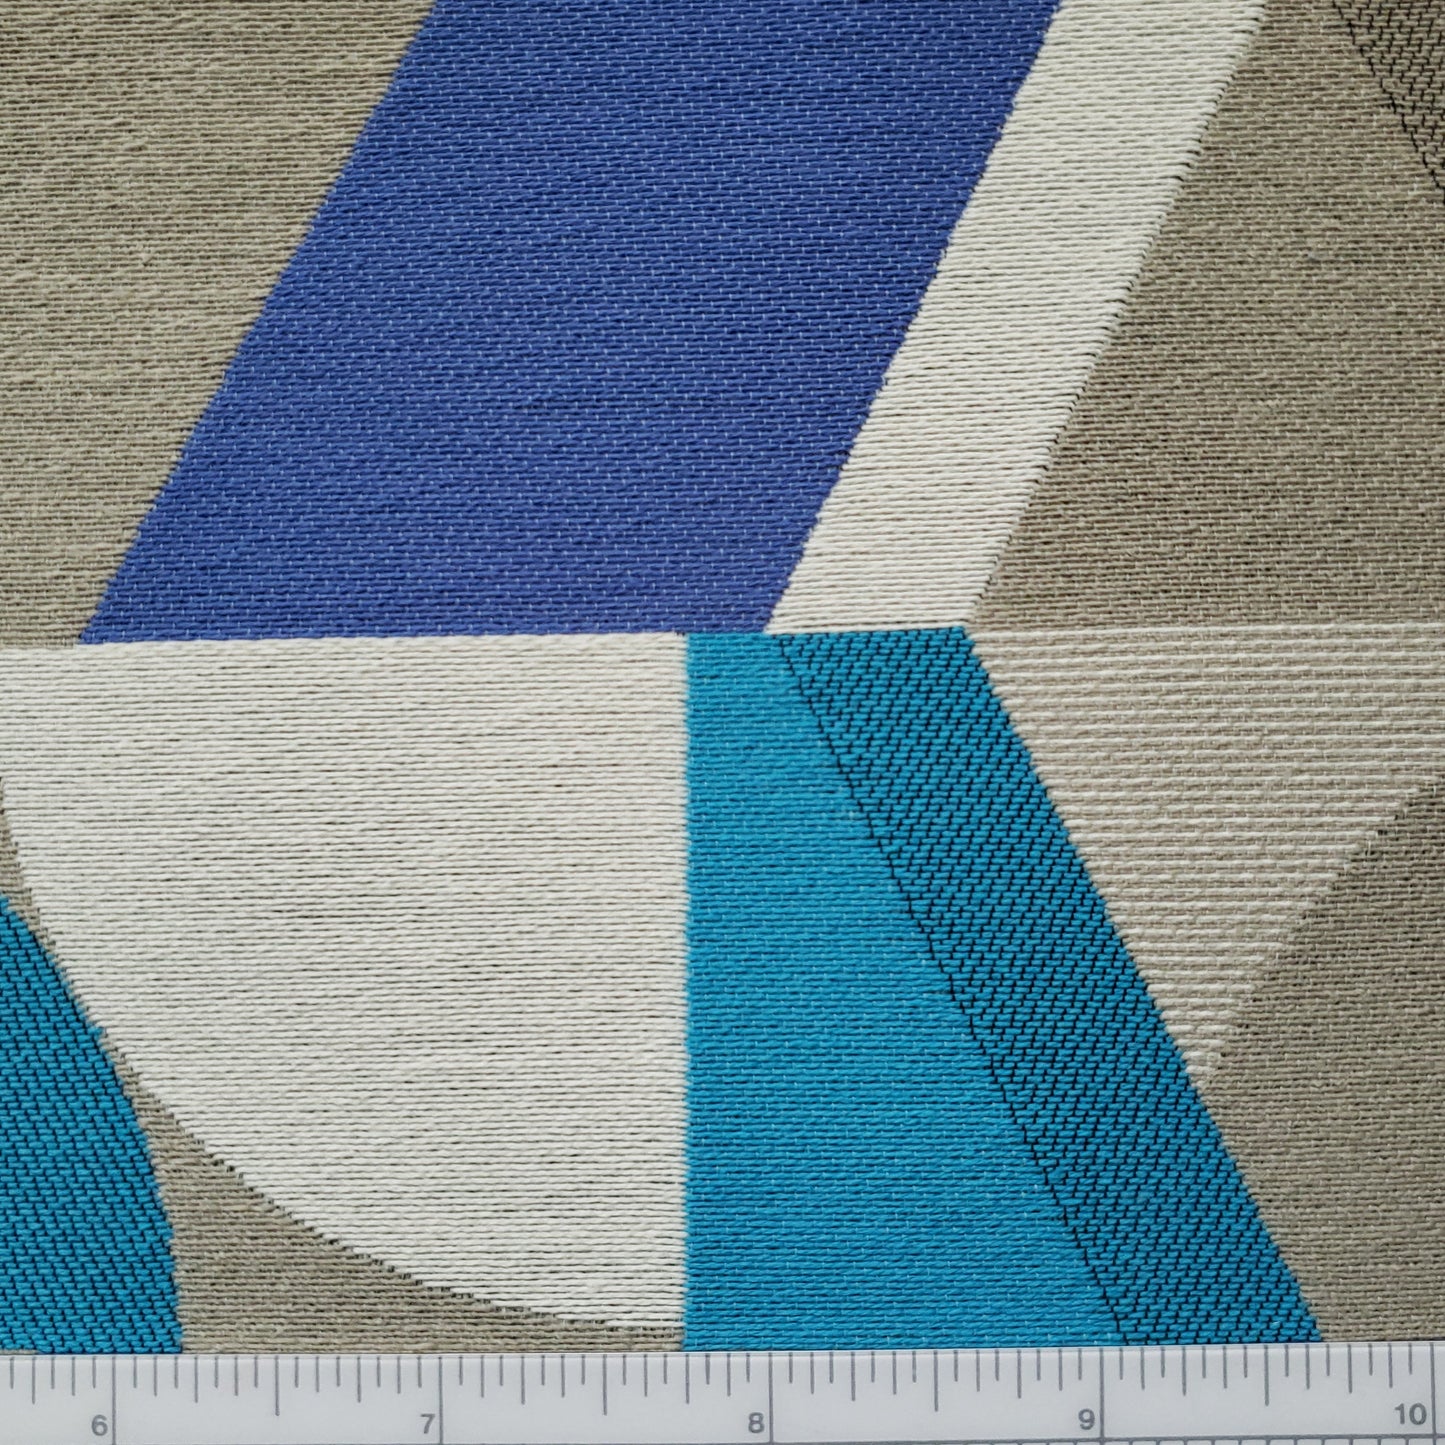 Whidbey Island Shore Fabric